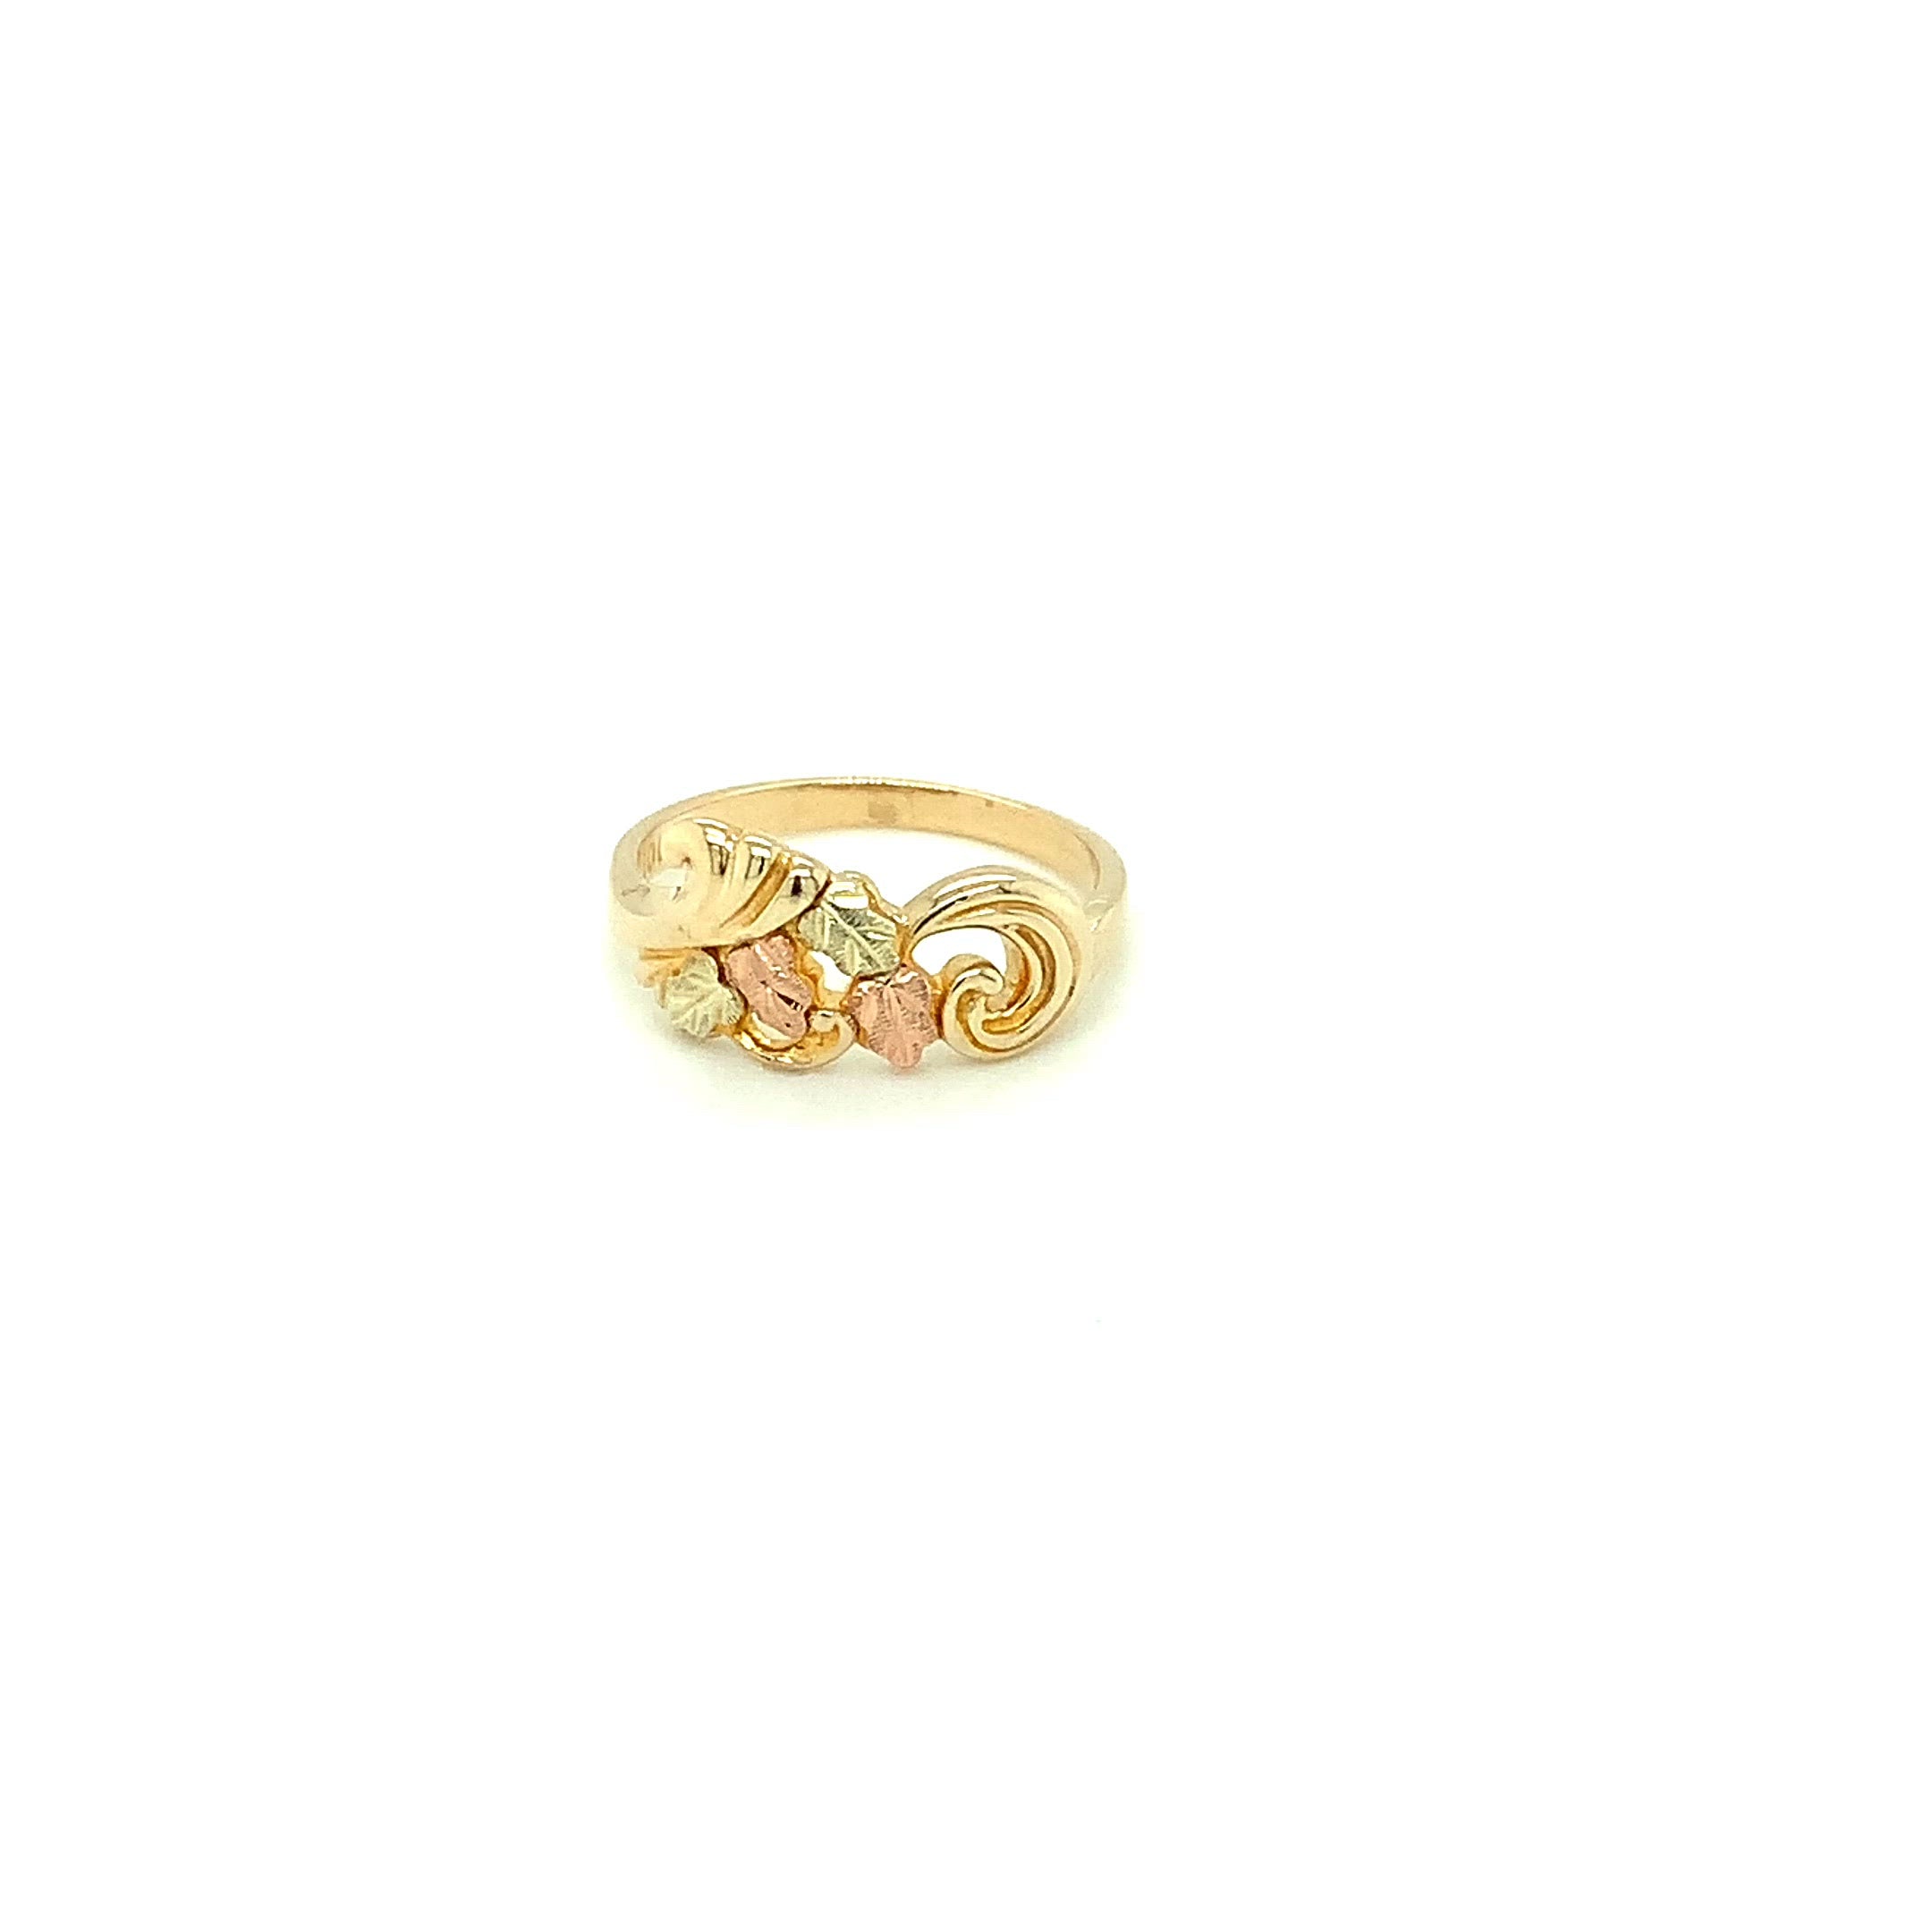 Black Hills Gold Ring 10K Solid Gold Band Leaf Ring Ladies Ring Stackable Ring Vine Ring Nature Ring Boho Ring Women's Ring USA Fine Jewelry